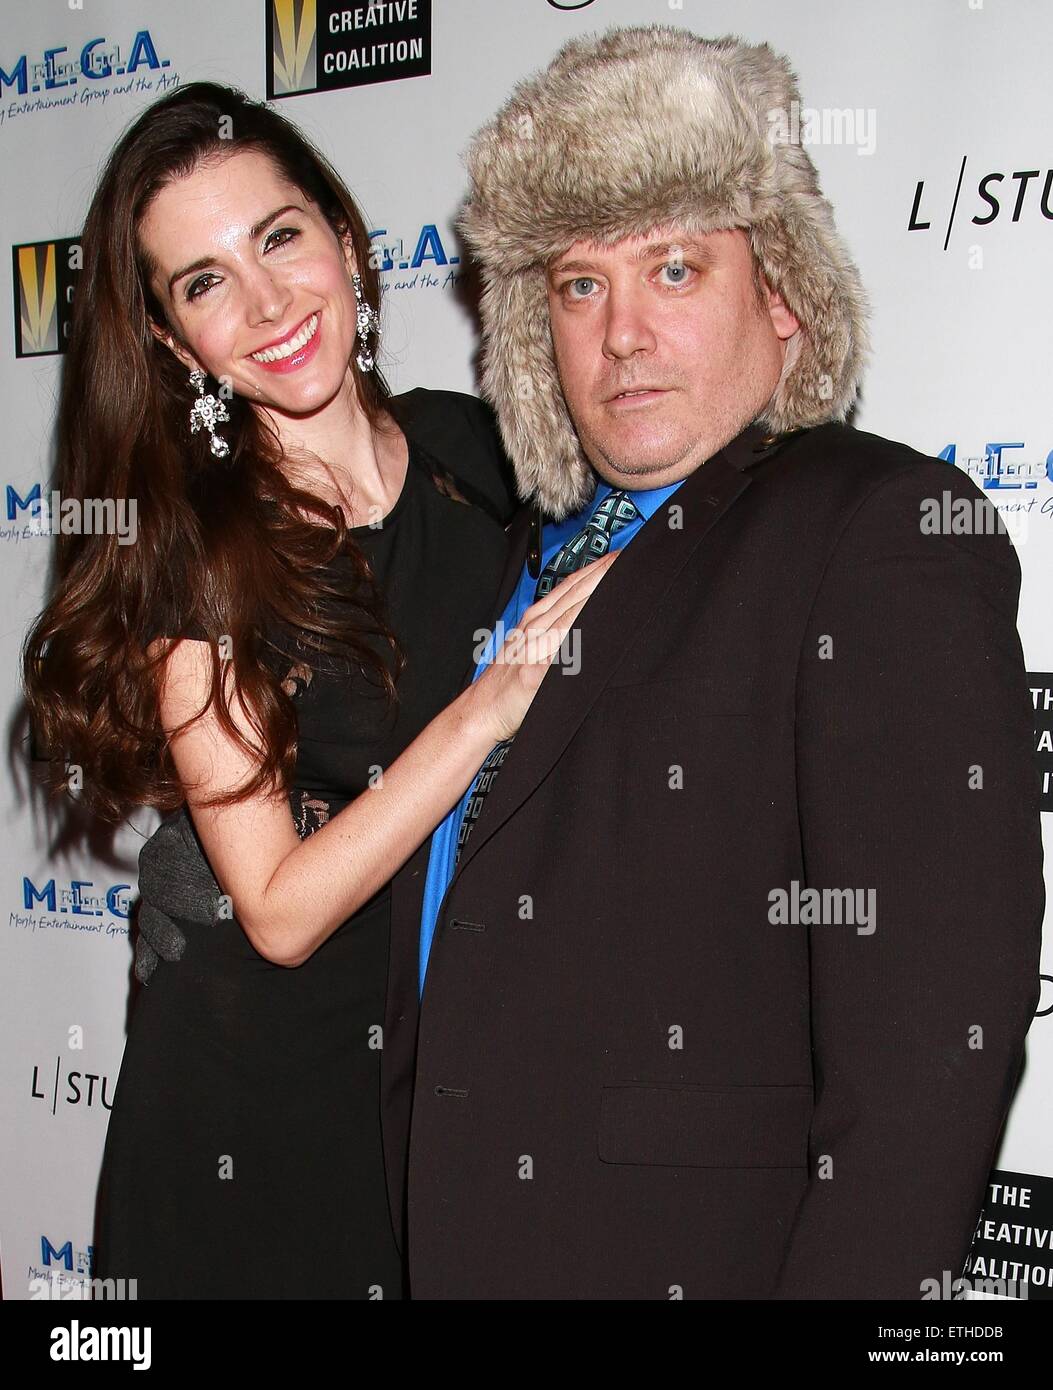 New York premiere party of 'Cop Show' at Caroline's On Broadway Comedy Club - Arrivals  Featuring: Elisa Jordana, Benjy Bronk Where: New York, New York, United States When: 23 Feb 2015 Credit: Joseph Marzullo/WENN.com Stock Photo